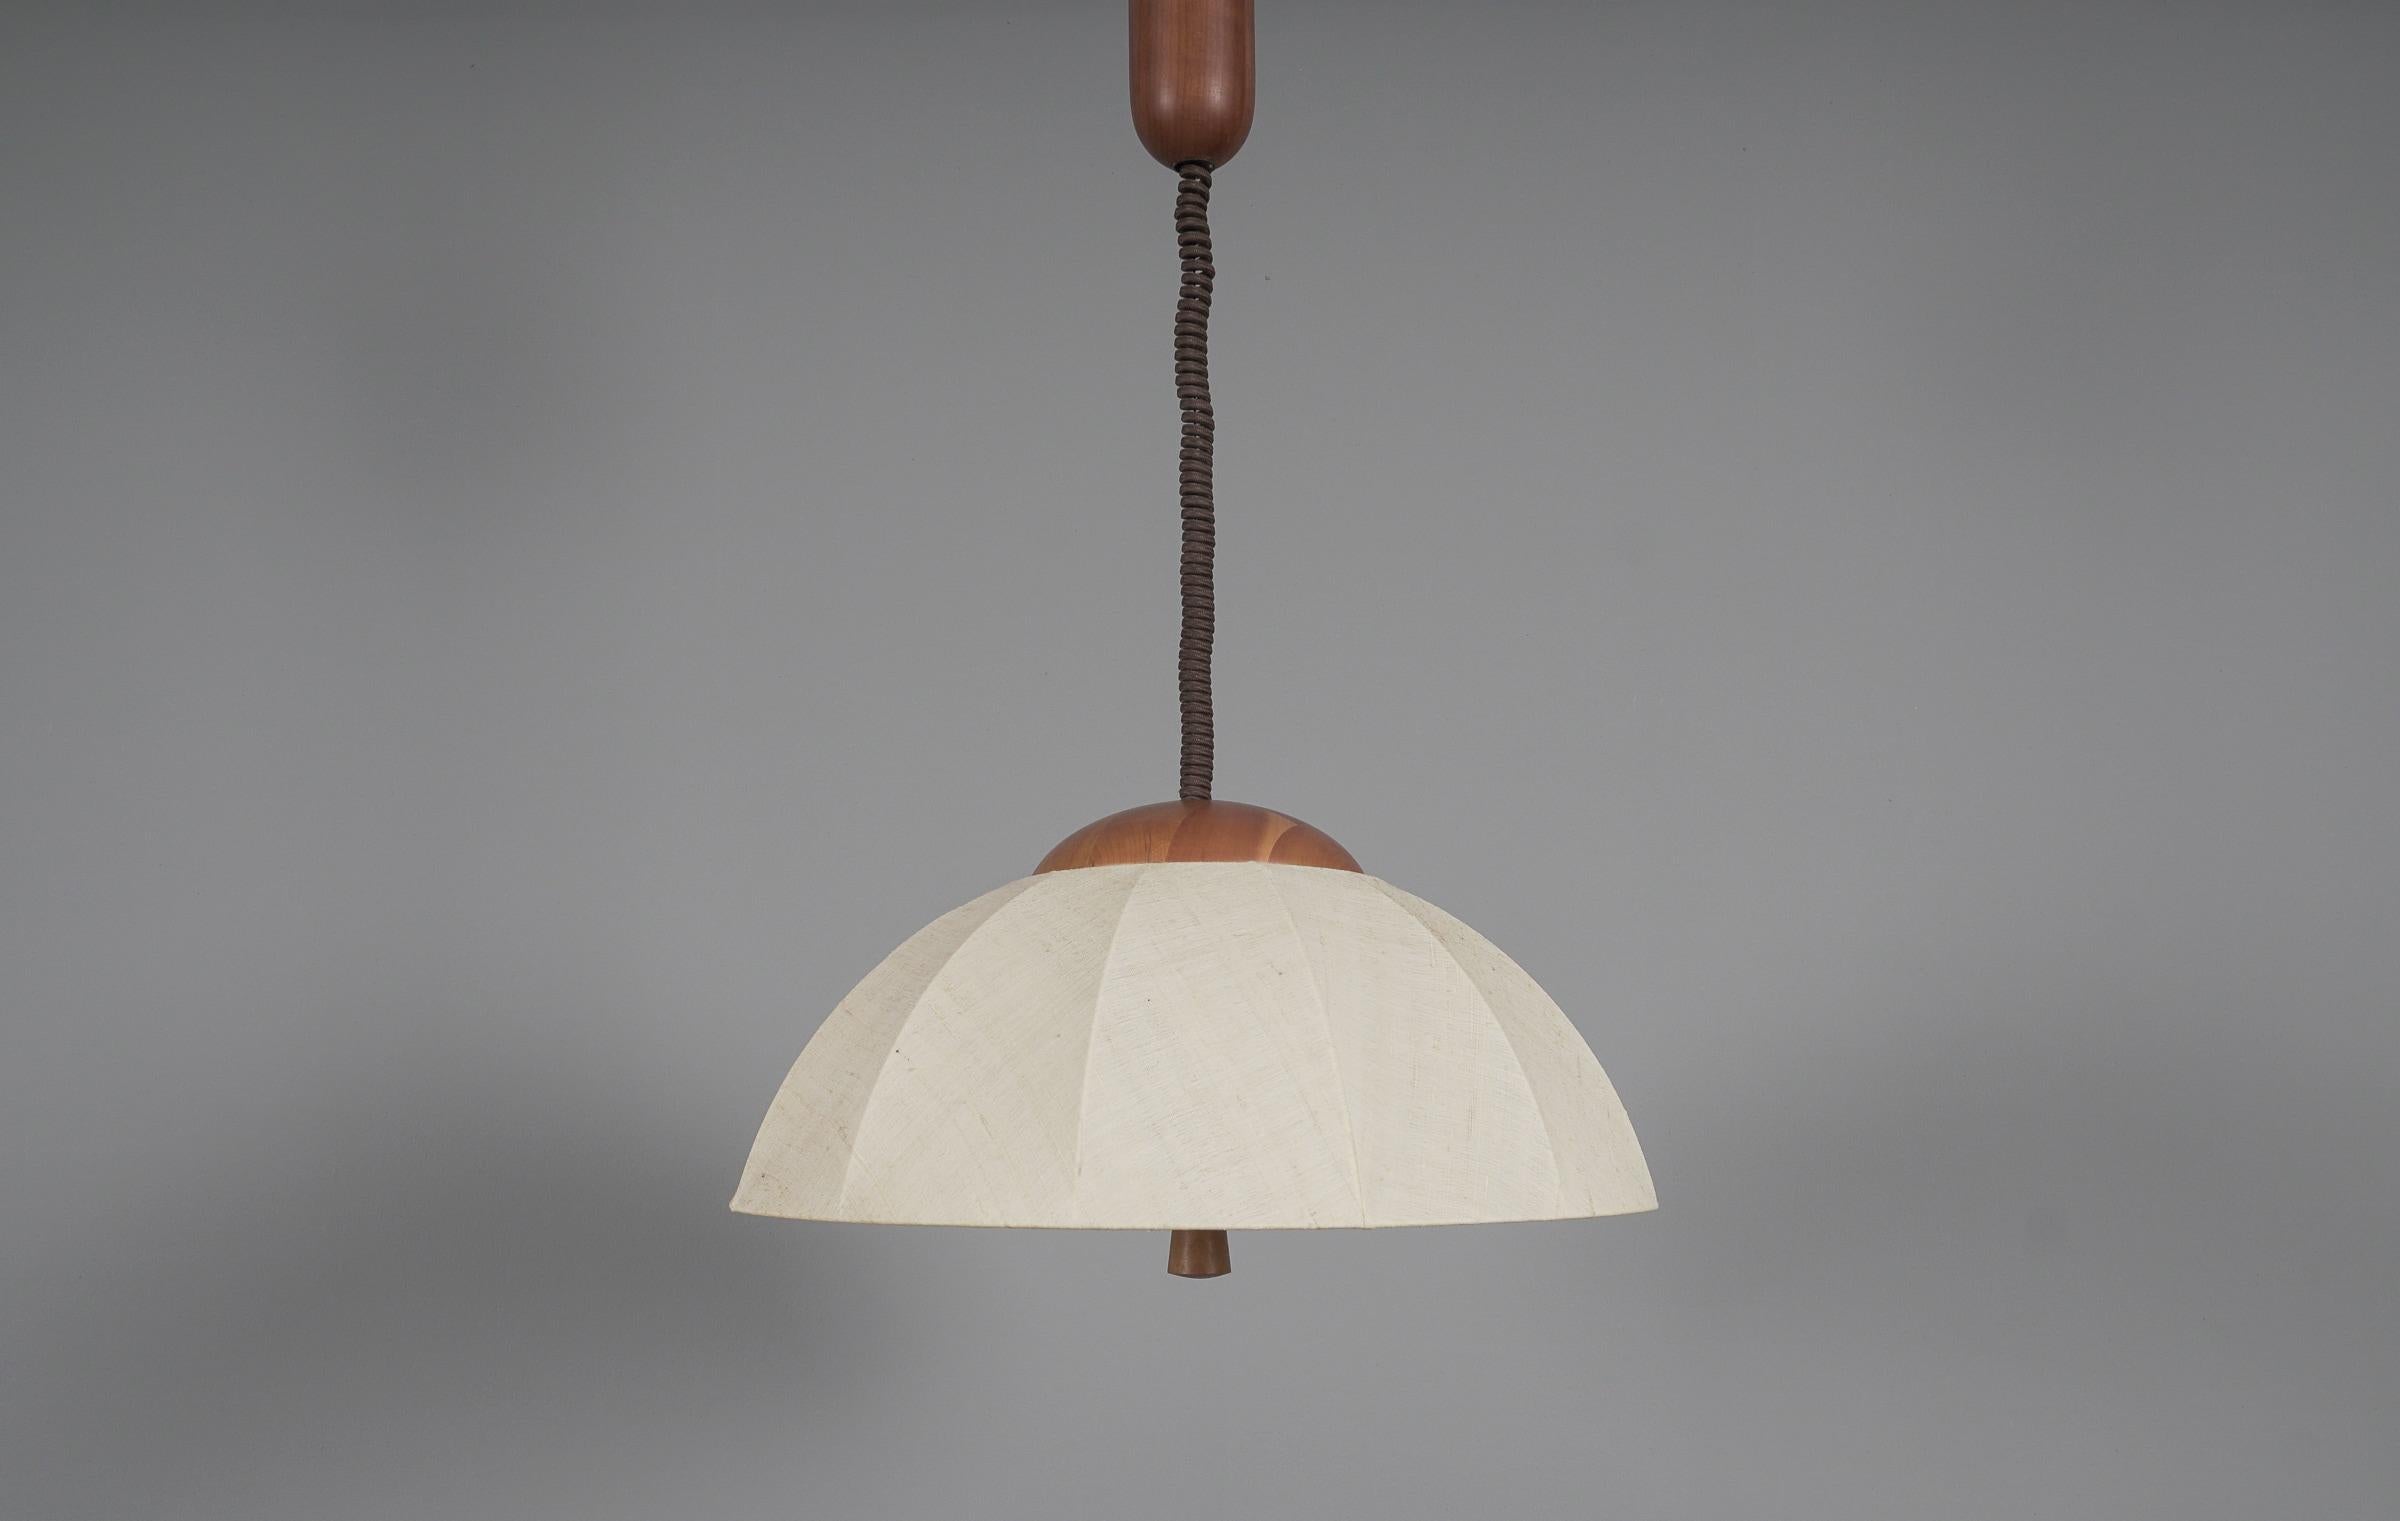 
The lamp can be adjusted up from 75 to 175cm height.

Executed in rattan and wood, the pendant lamp comes with 2 x E27 / E26 Edison screw fit bulb holder, is wired and in working condition. It runs both on 110/230 Volt. Delivery without bulb.